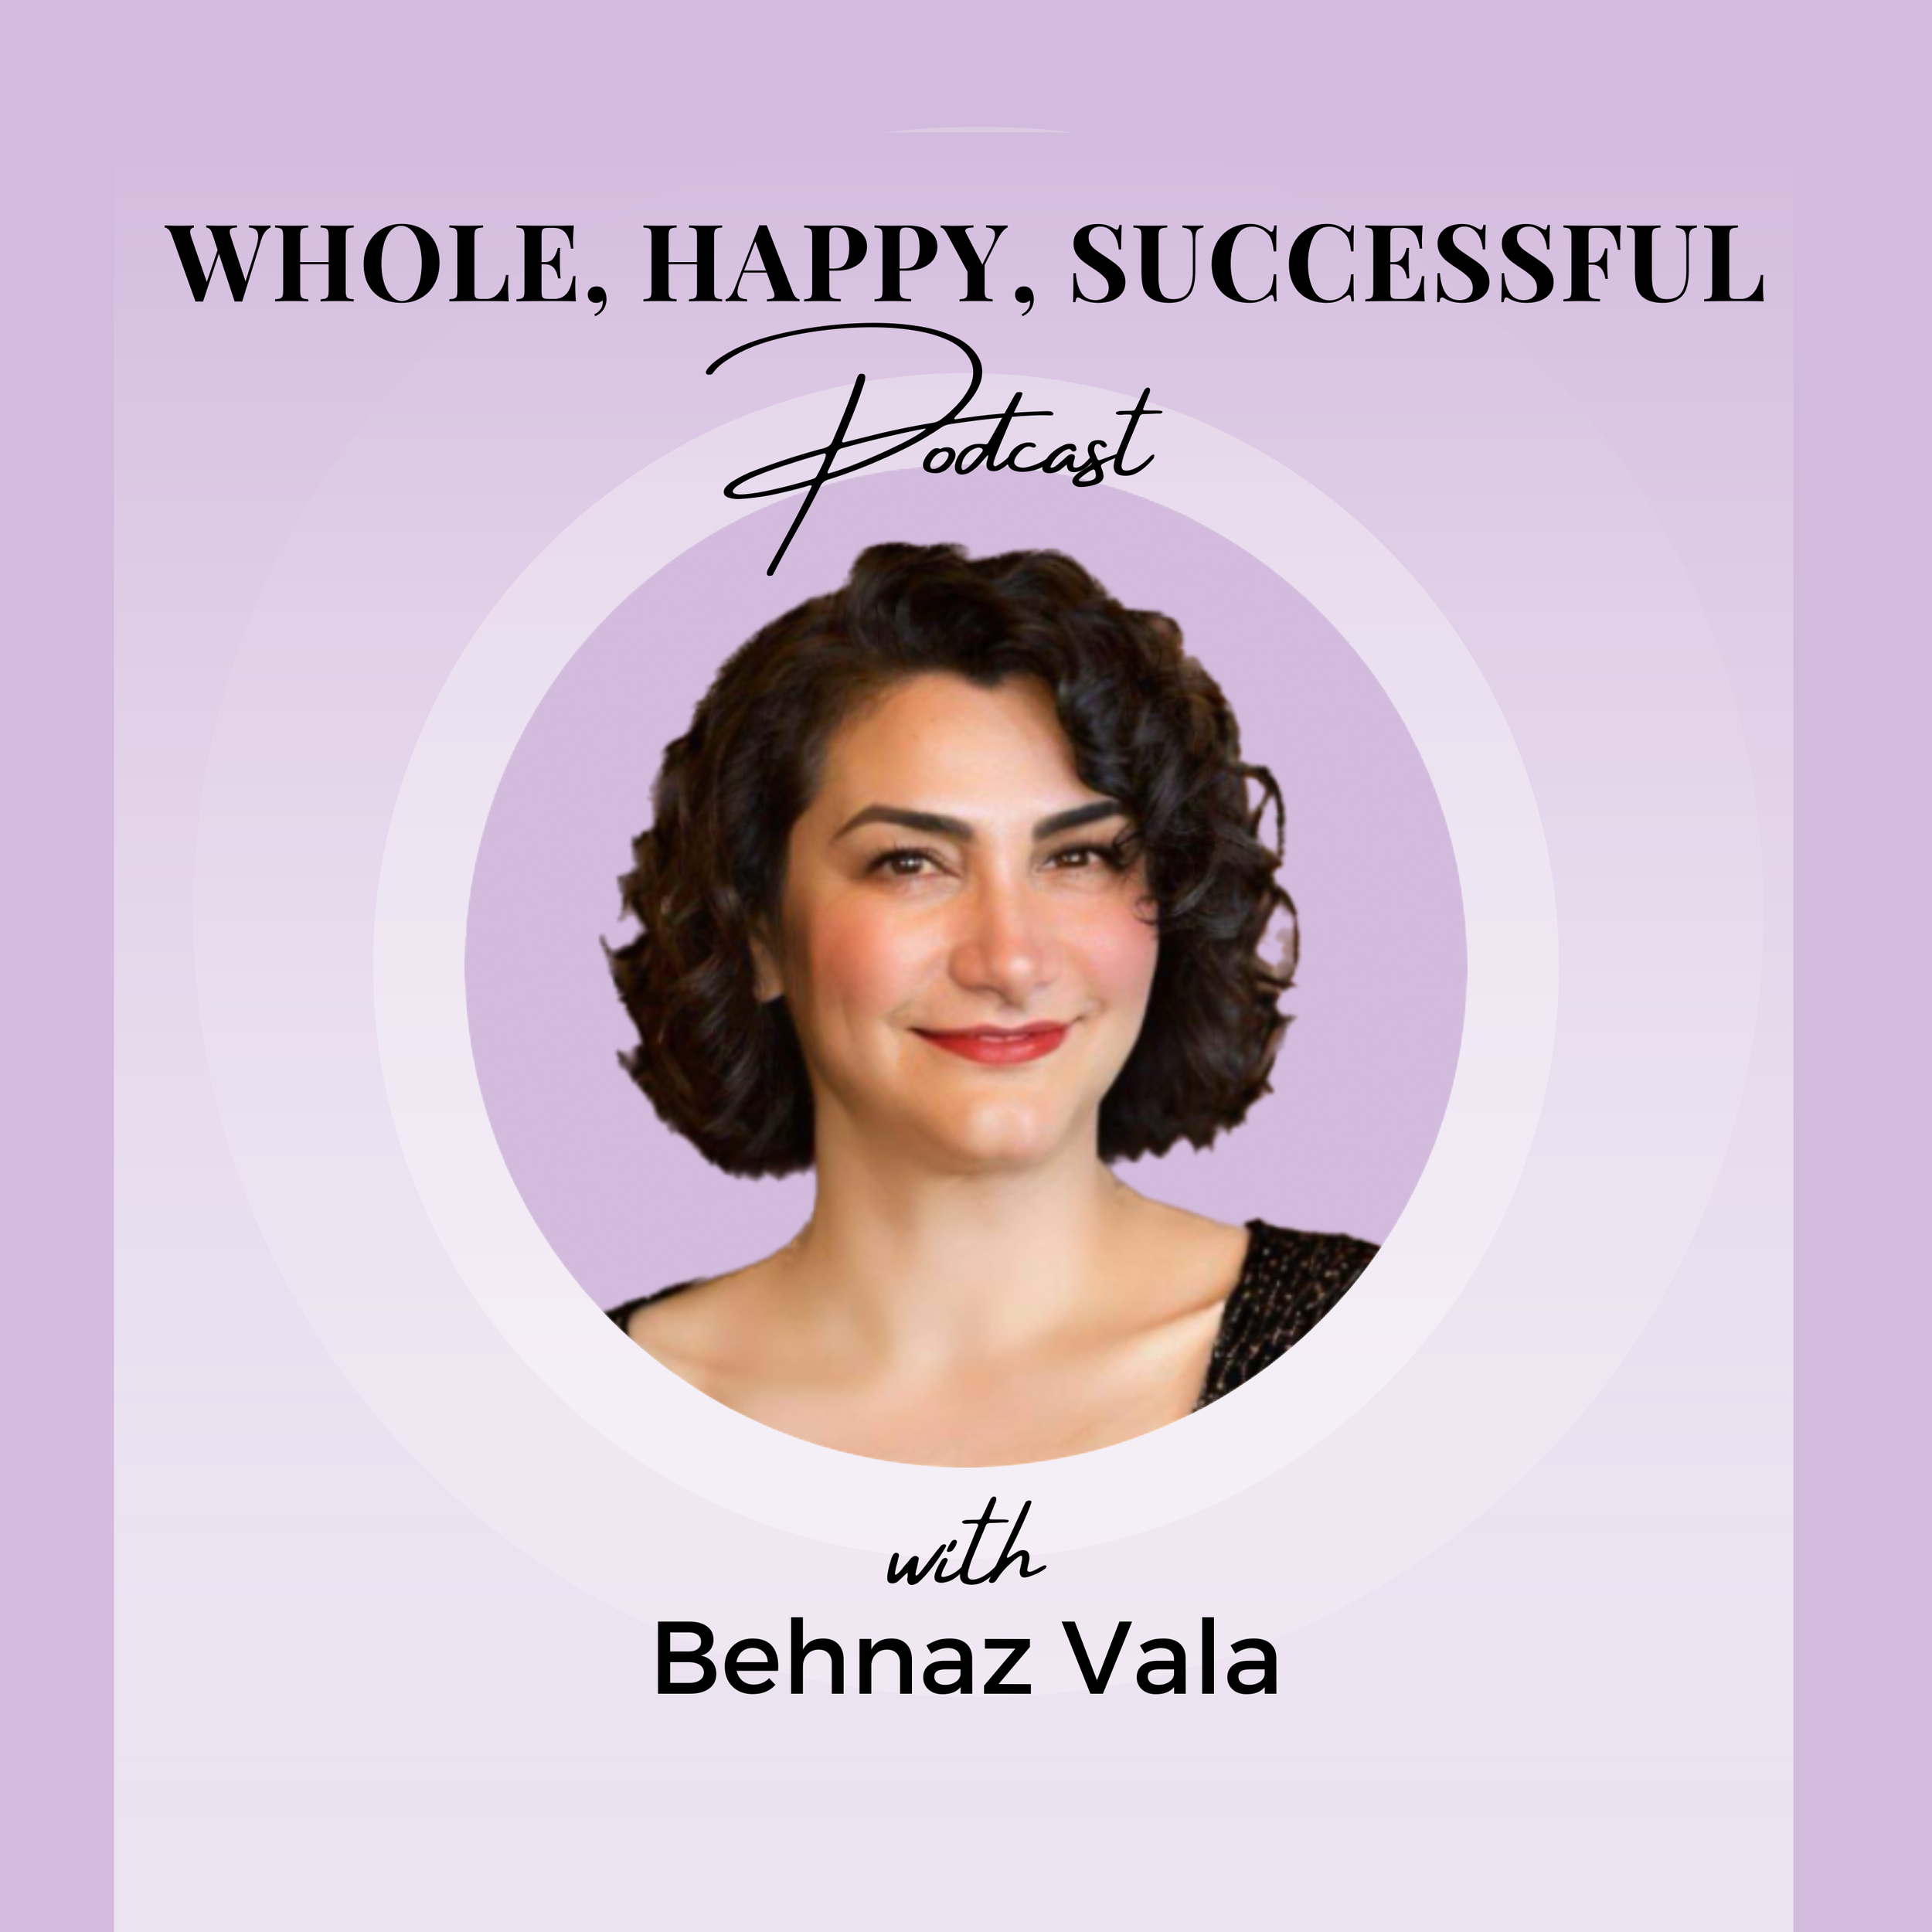 Whole, Happy, Successful Podcast Cover copy.png